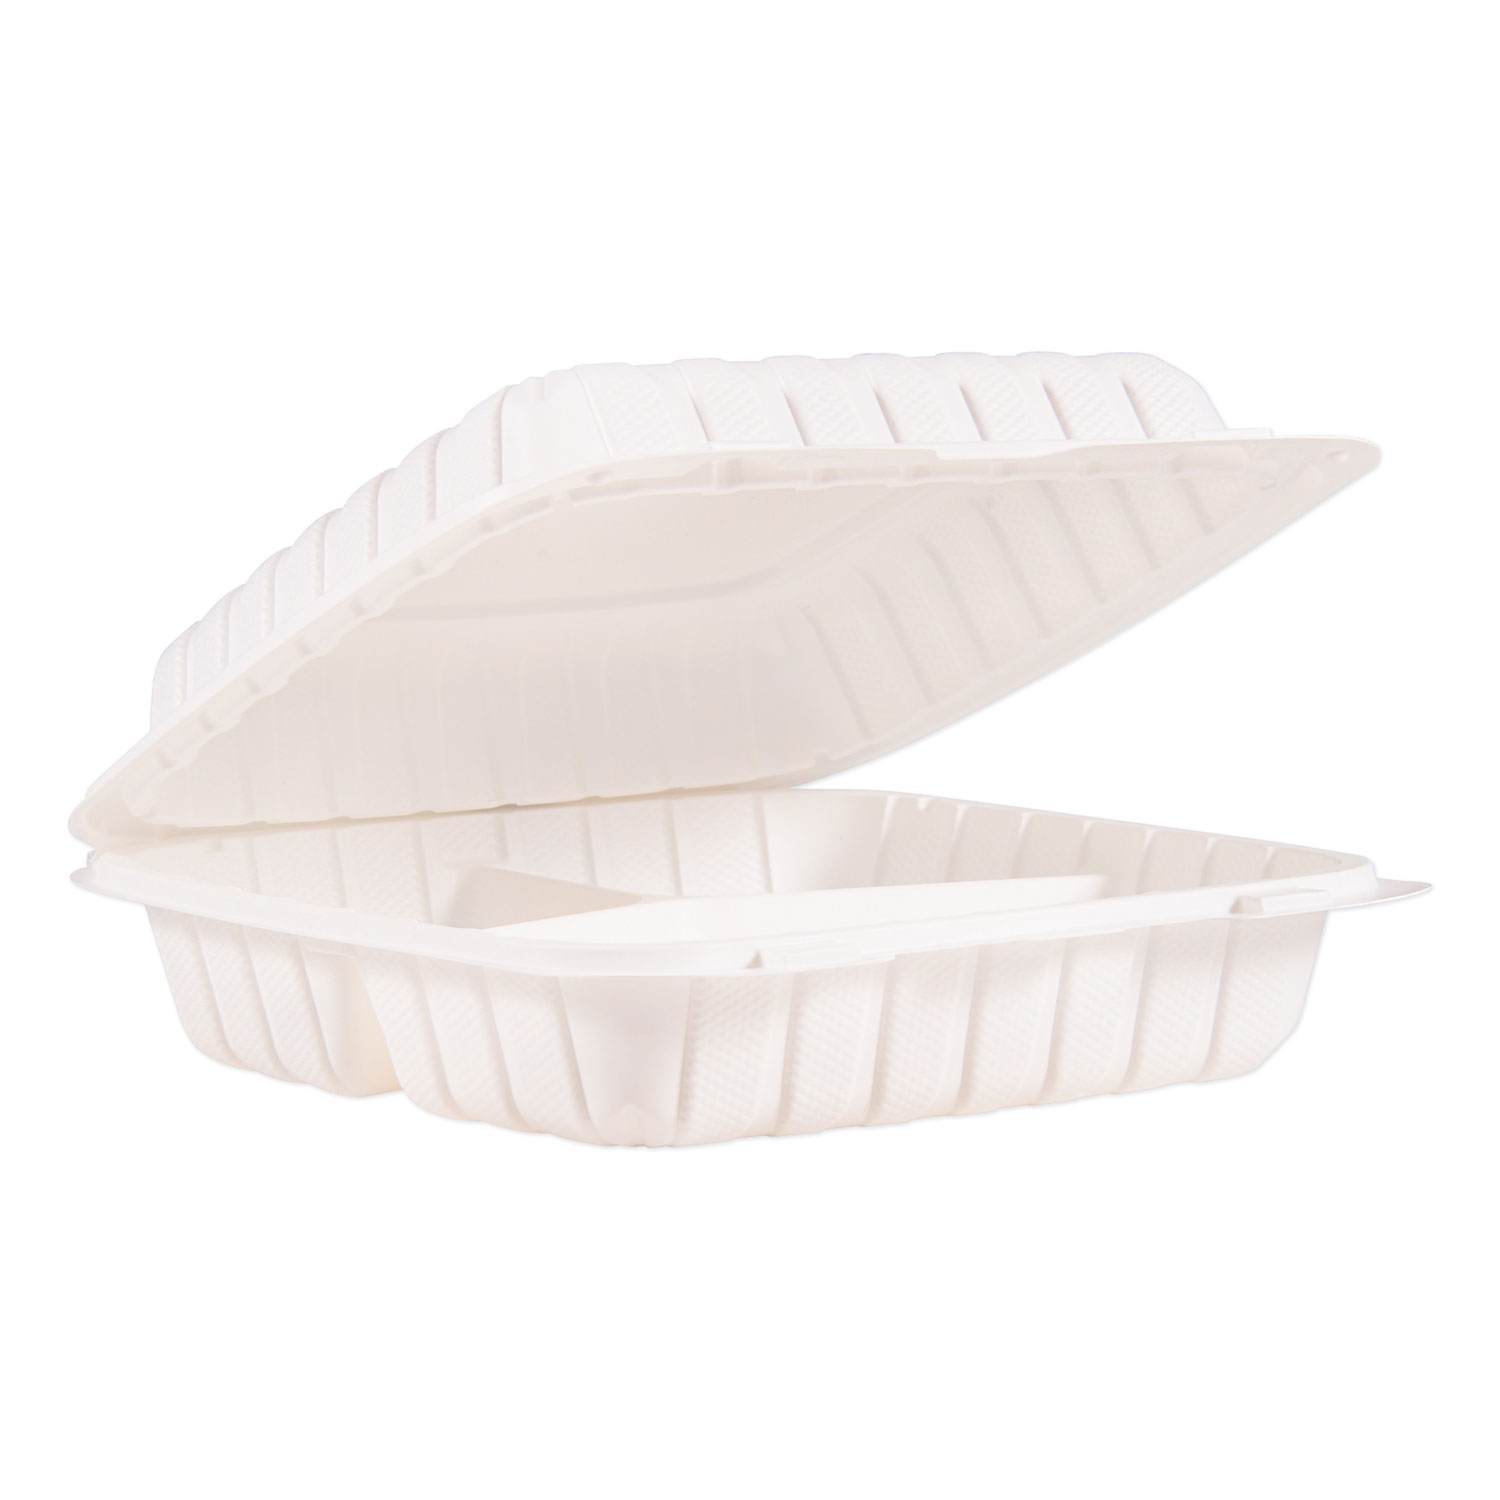  ProPlanet by Dart 90MFPPHT3 Hinged Lid Three Compartment Containers, 9 x 8.8 x 3, White, 150/Carton (DCC90MFPPHT3) 